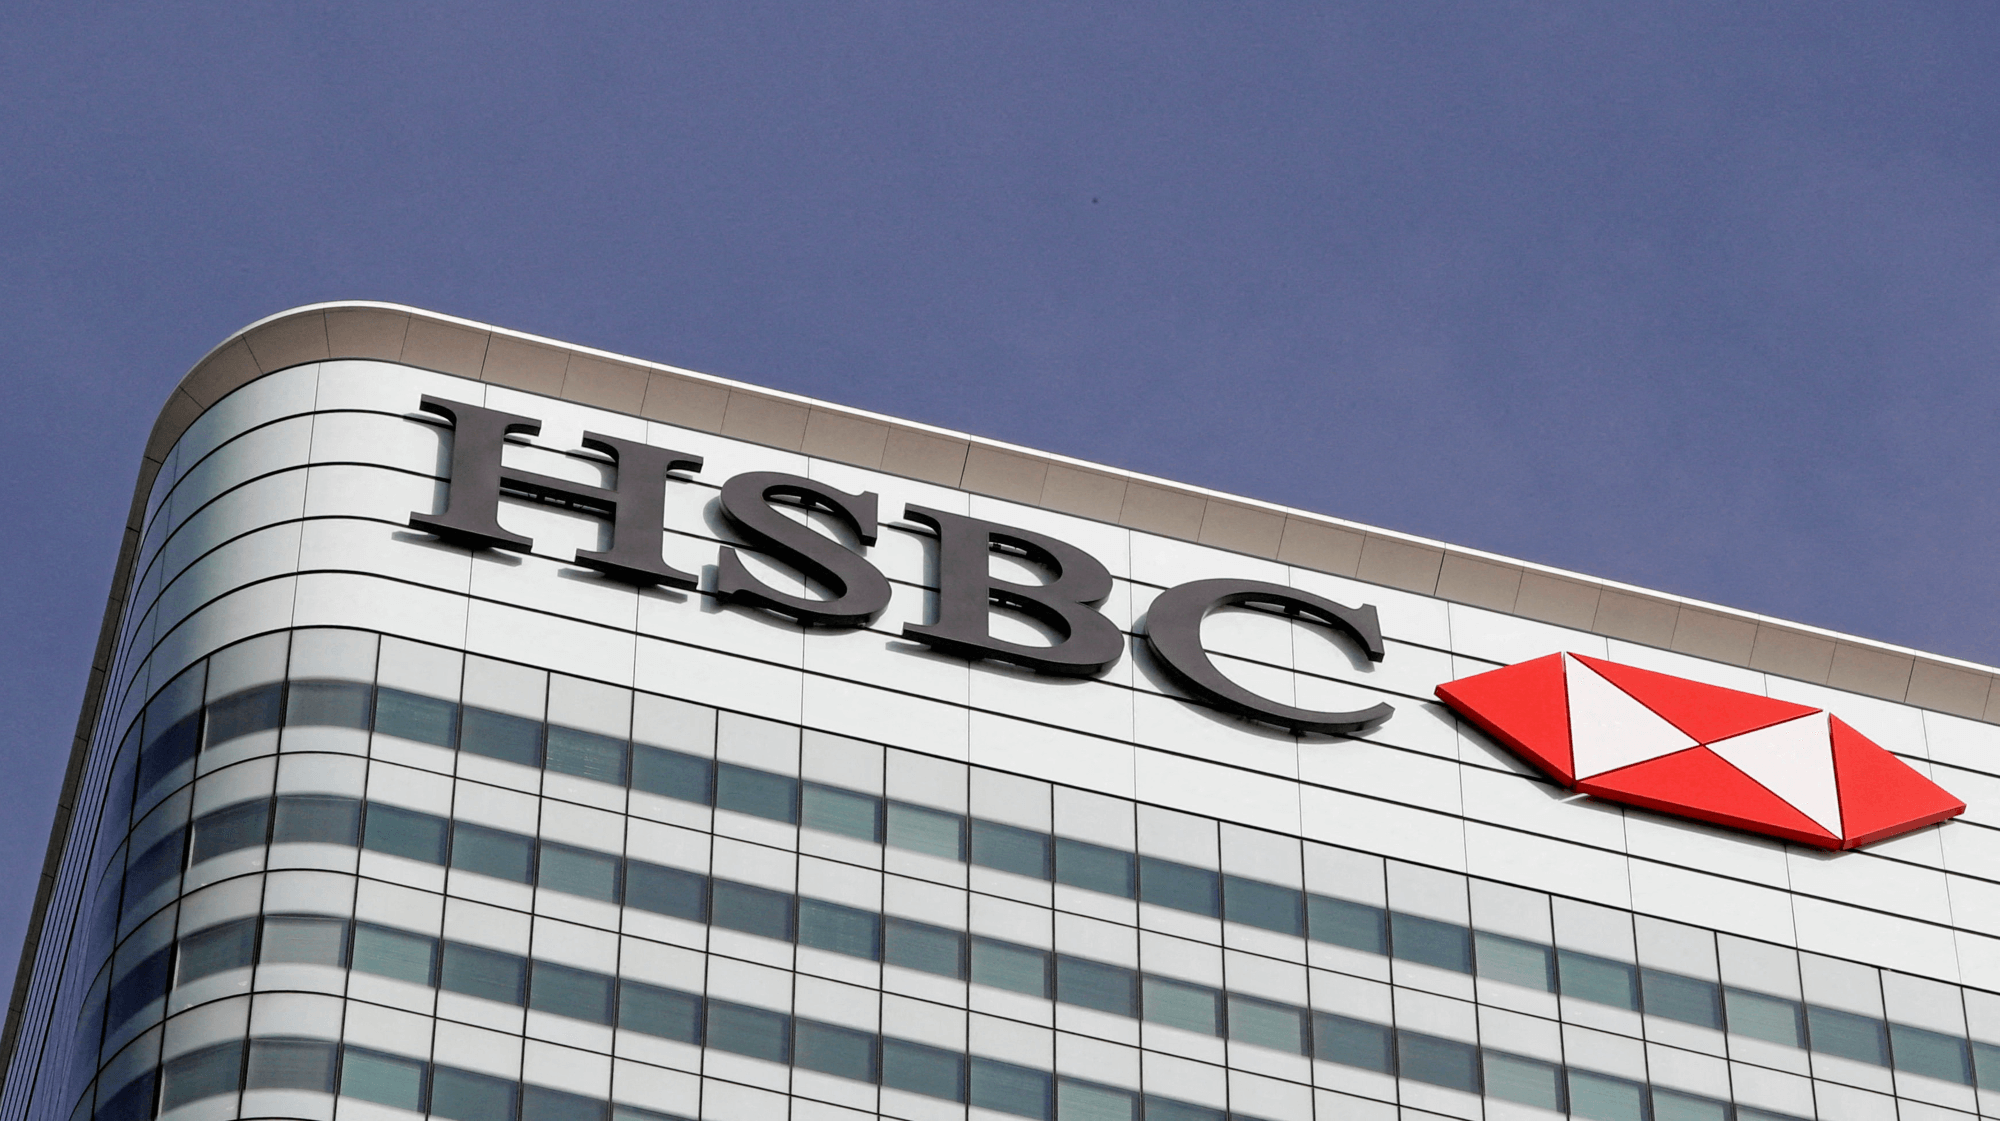 HSBC Securities (USA) Inc. has been fined $25,000 by CME Group's Clearing House Risk Committee for violating rules around liquidating customer positions